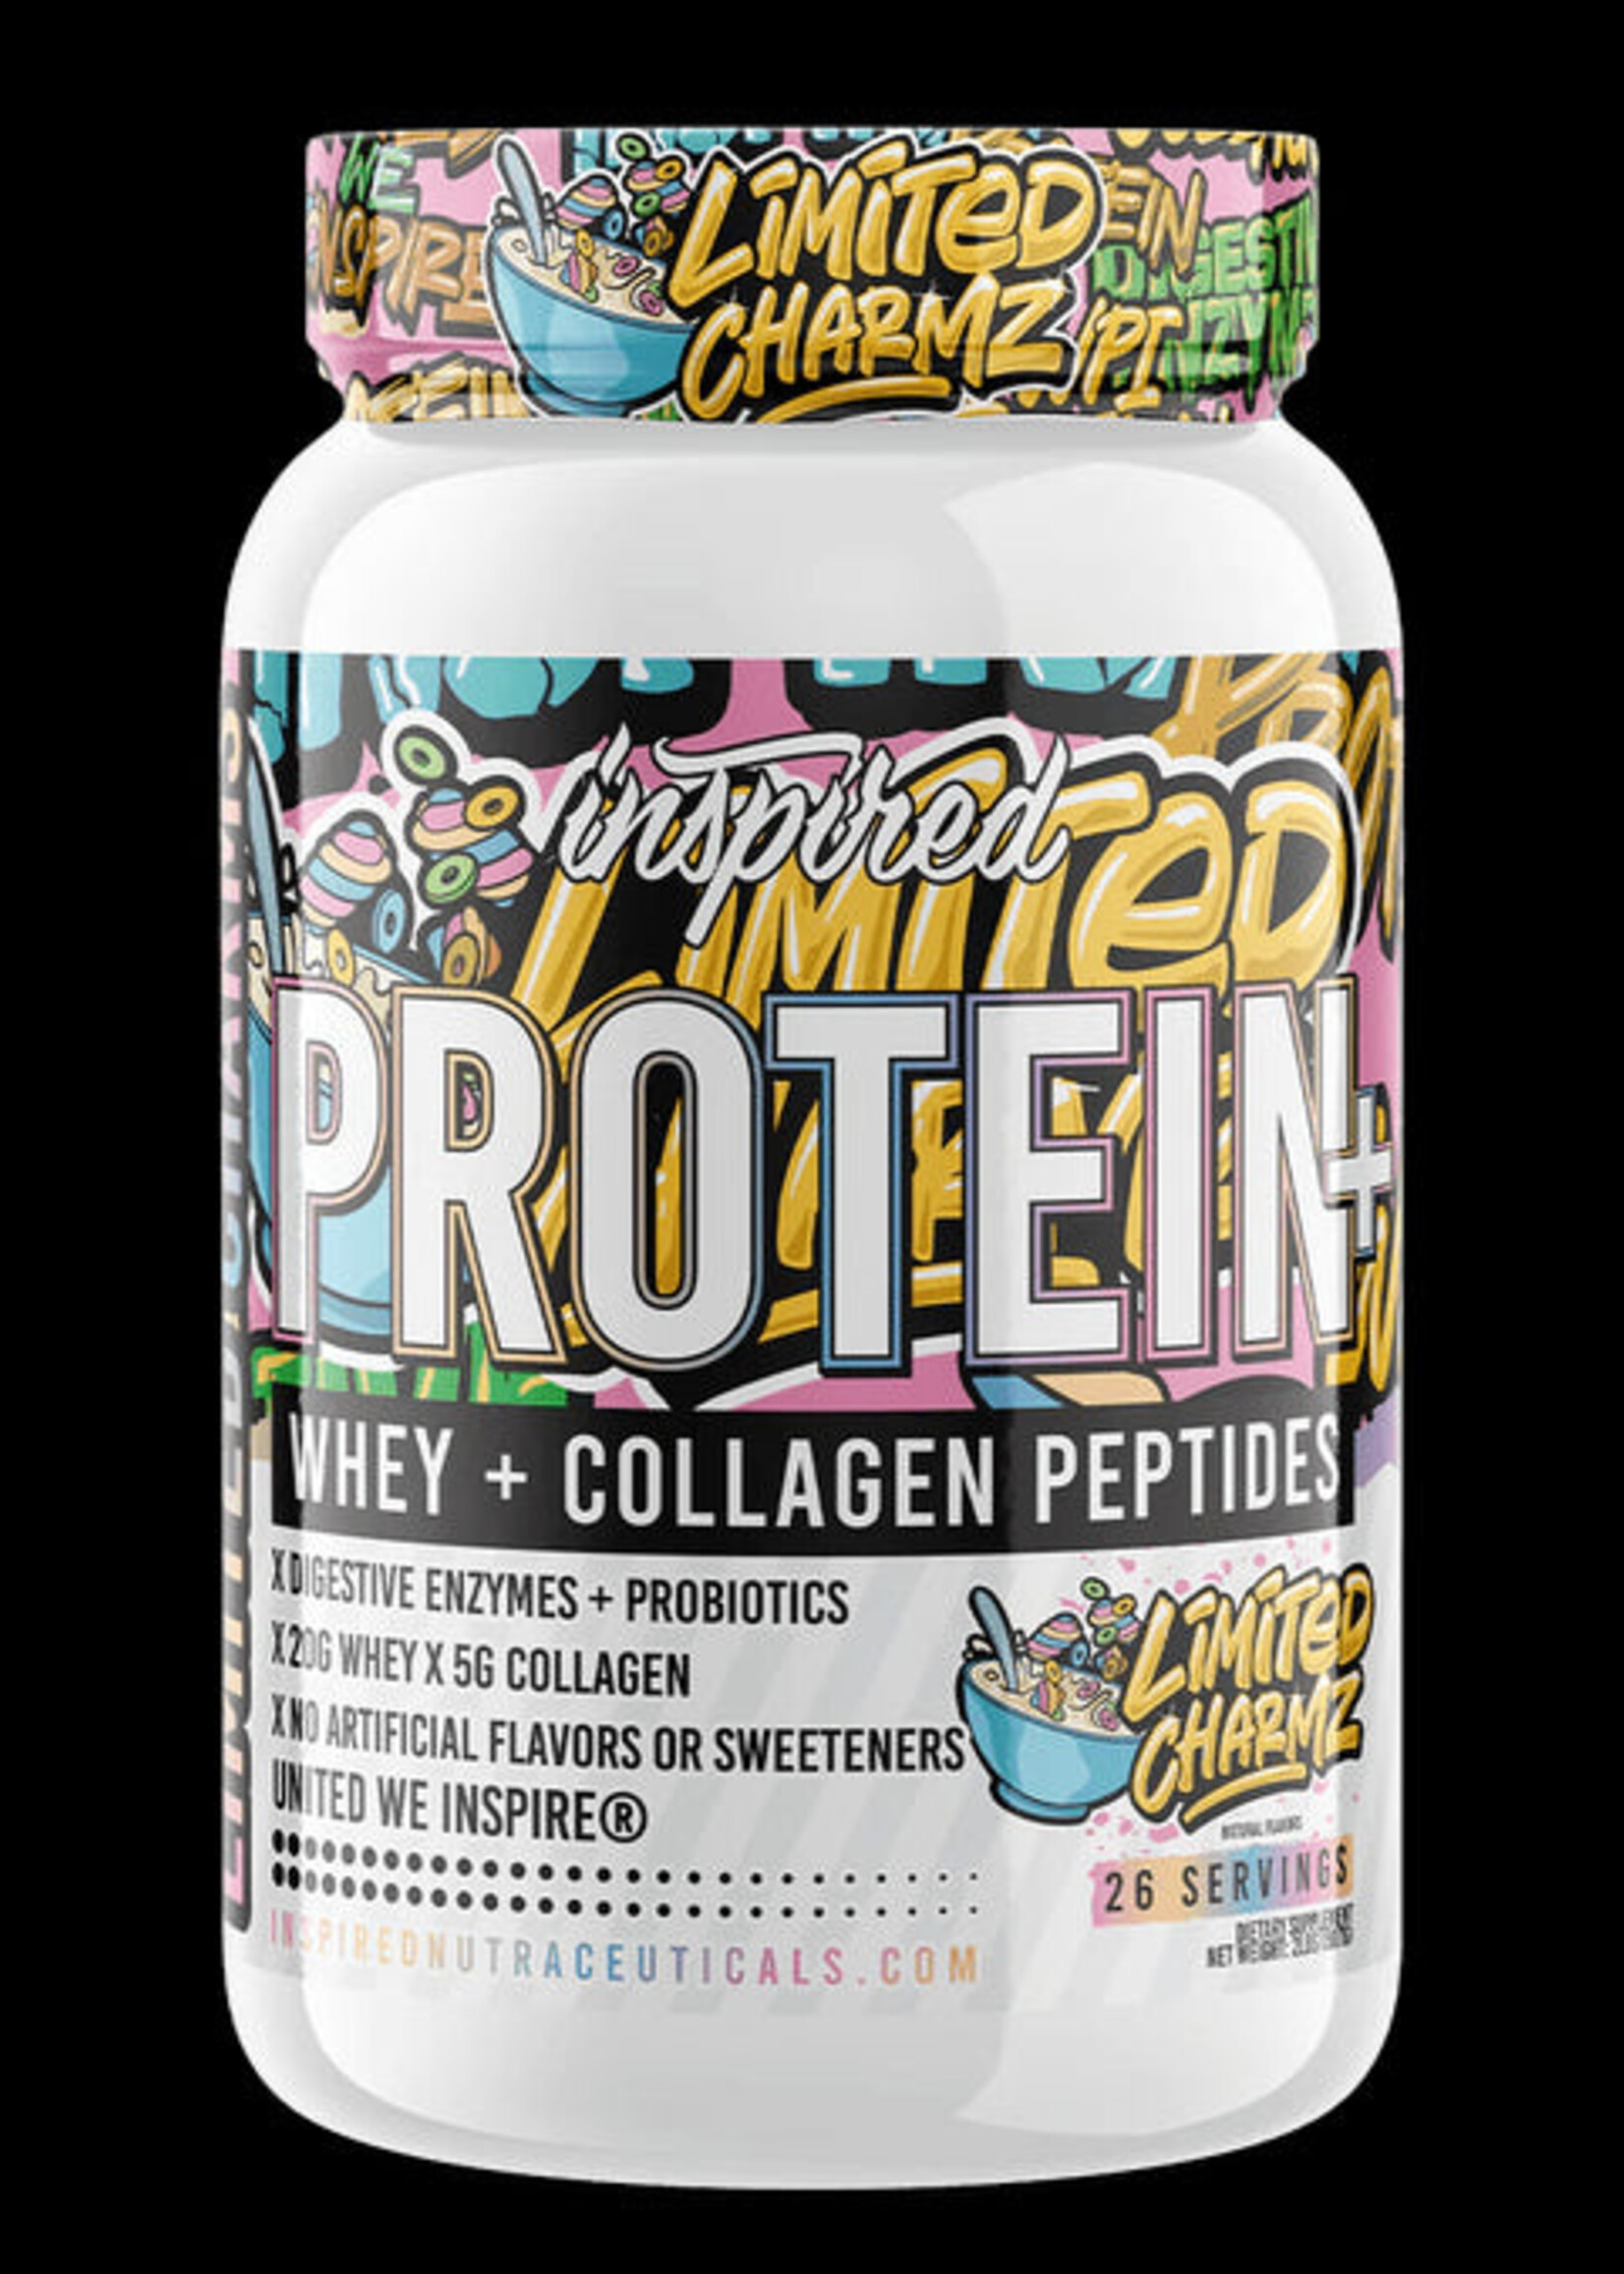 Inspired Protein Limited Charmz